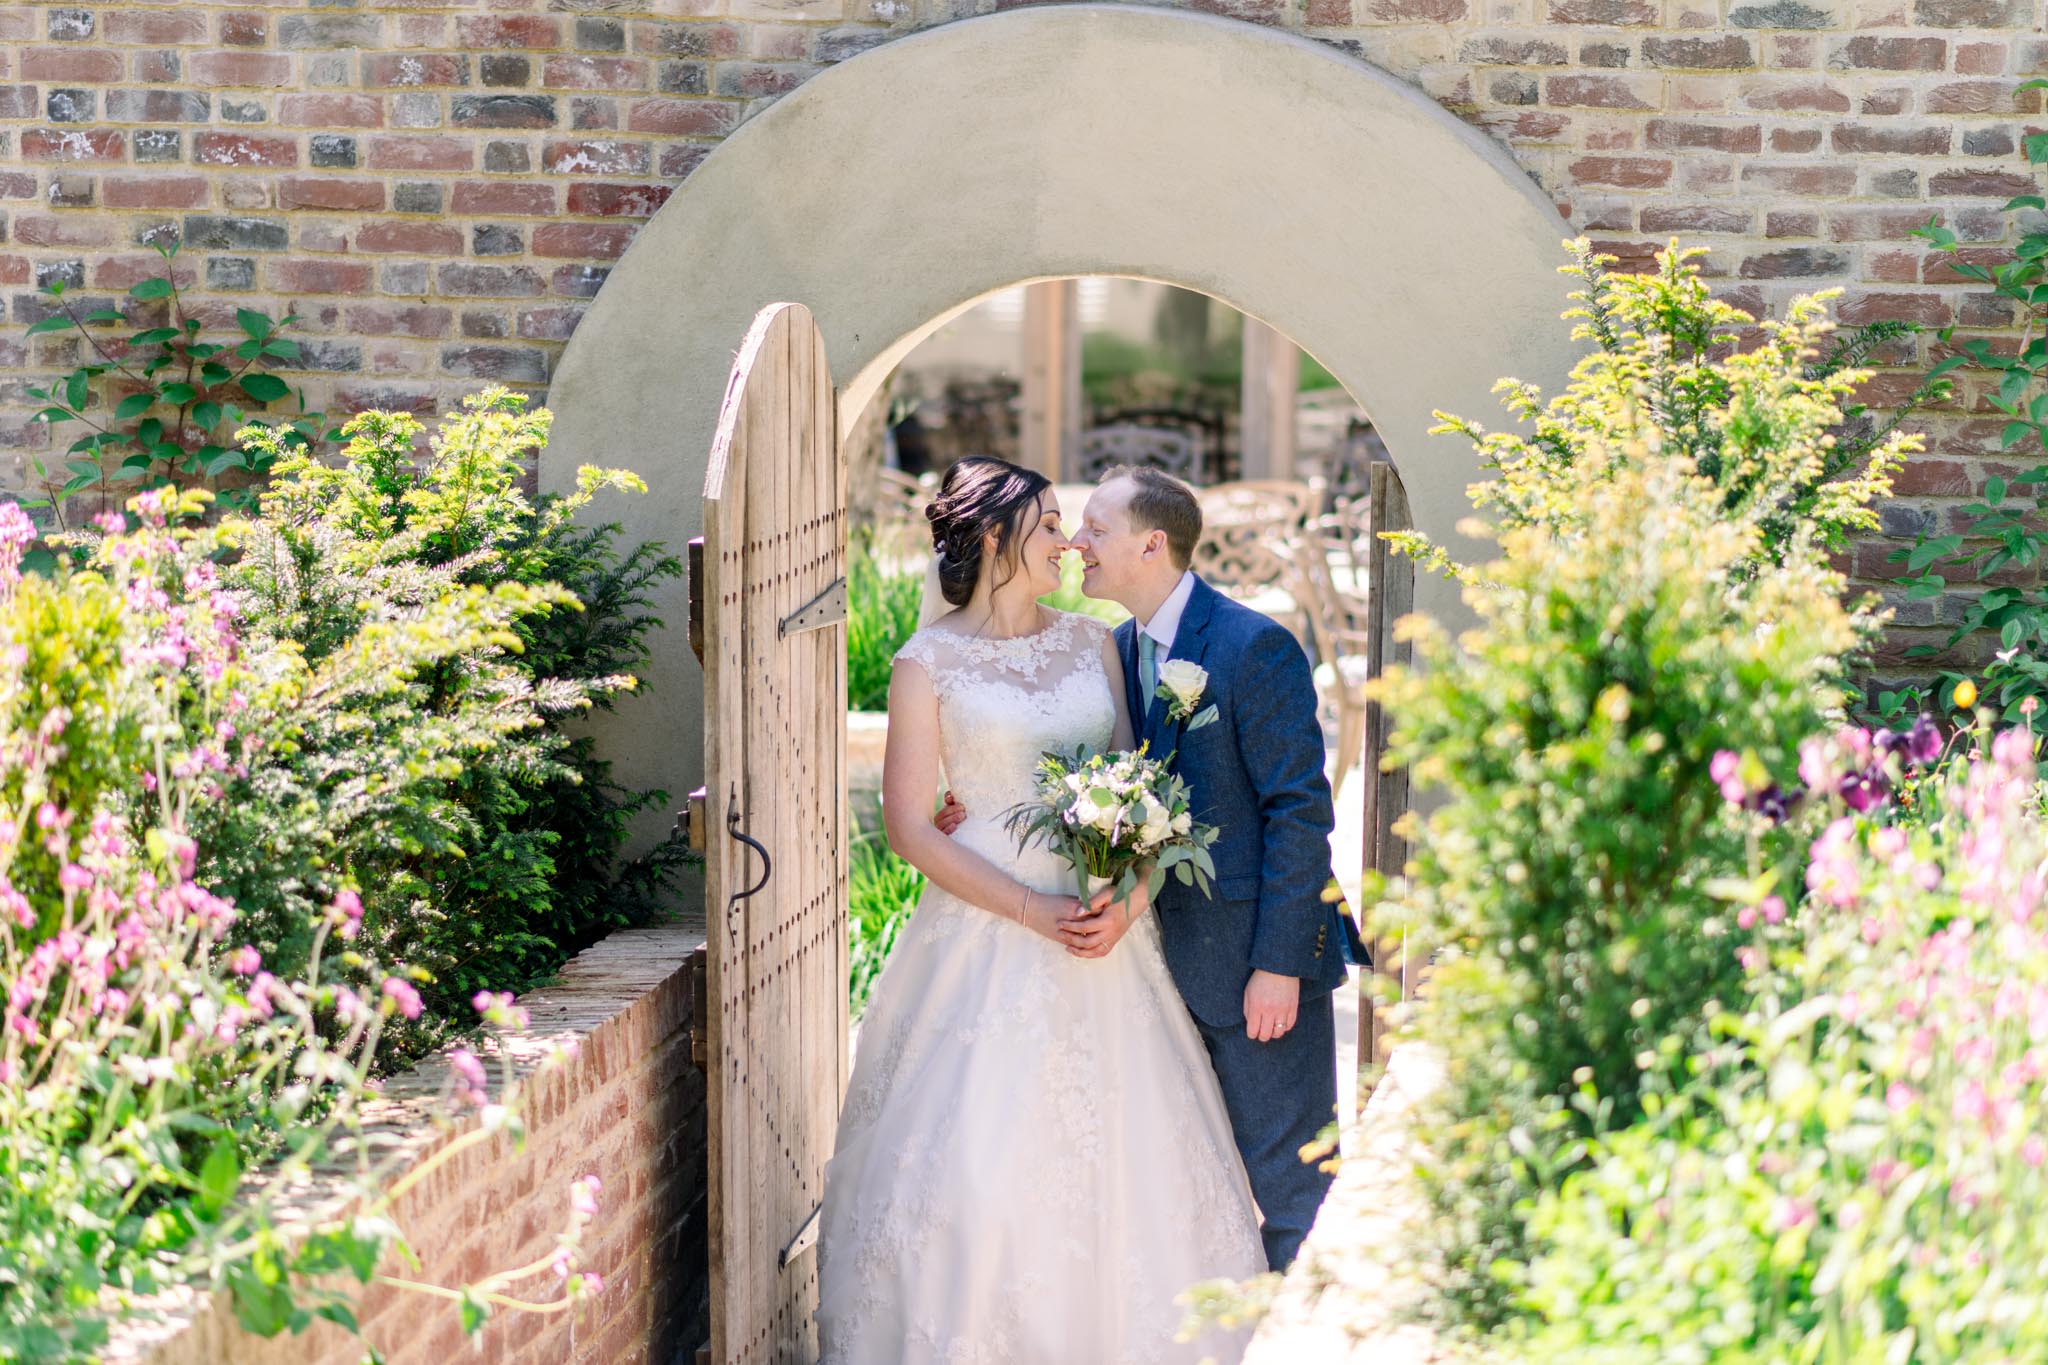 https://usercontent.one/wp/www.natalieandmax.co.uk/wp-content/uploads/2022/06/JD-Coltsfoot-Wedding-Photography-by-Natalie-and-Max-Photo-and-Films-379.jpg?media=1711985334